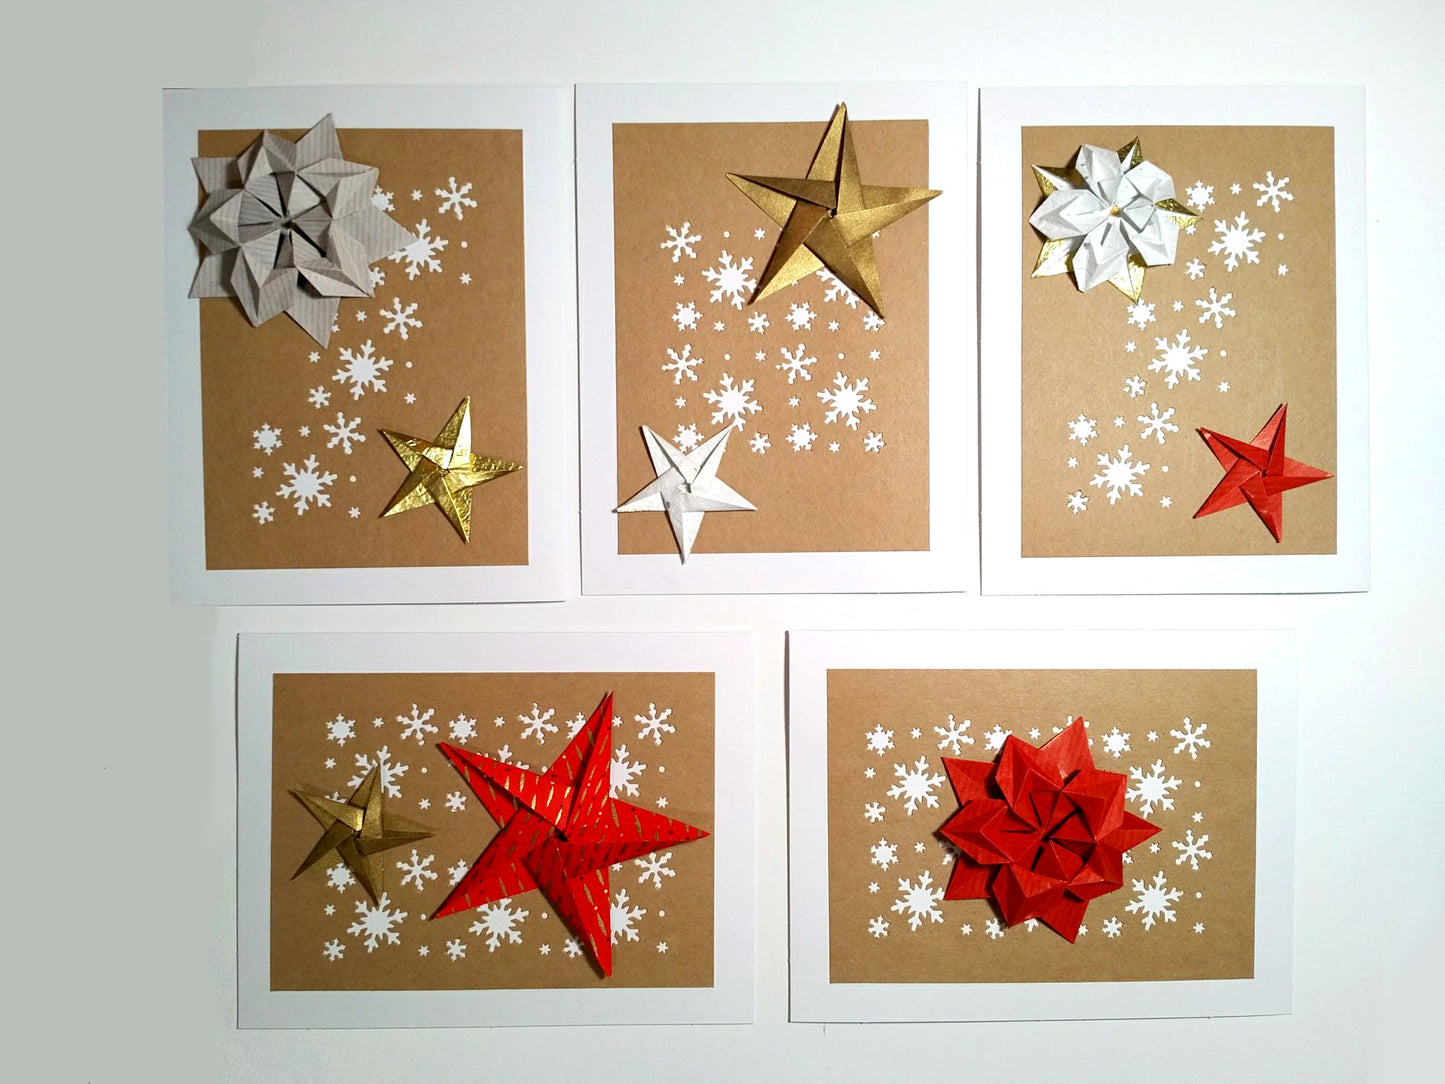 Set of five white cards. Each card has a kraft background with white snowflakes. On top are a variety of origami stars in white, gold and red.